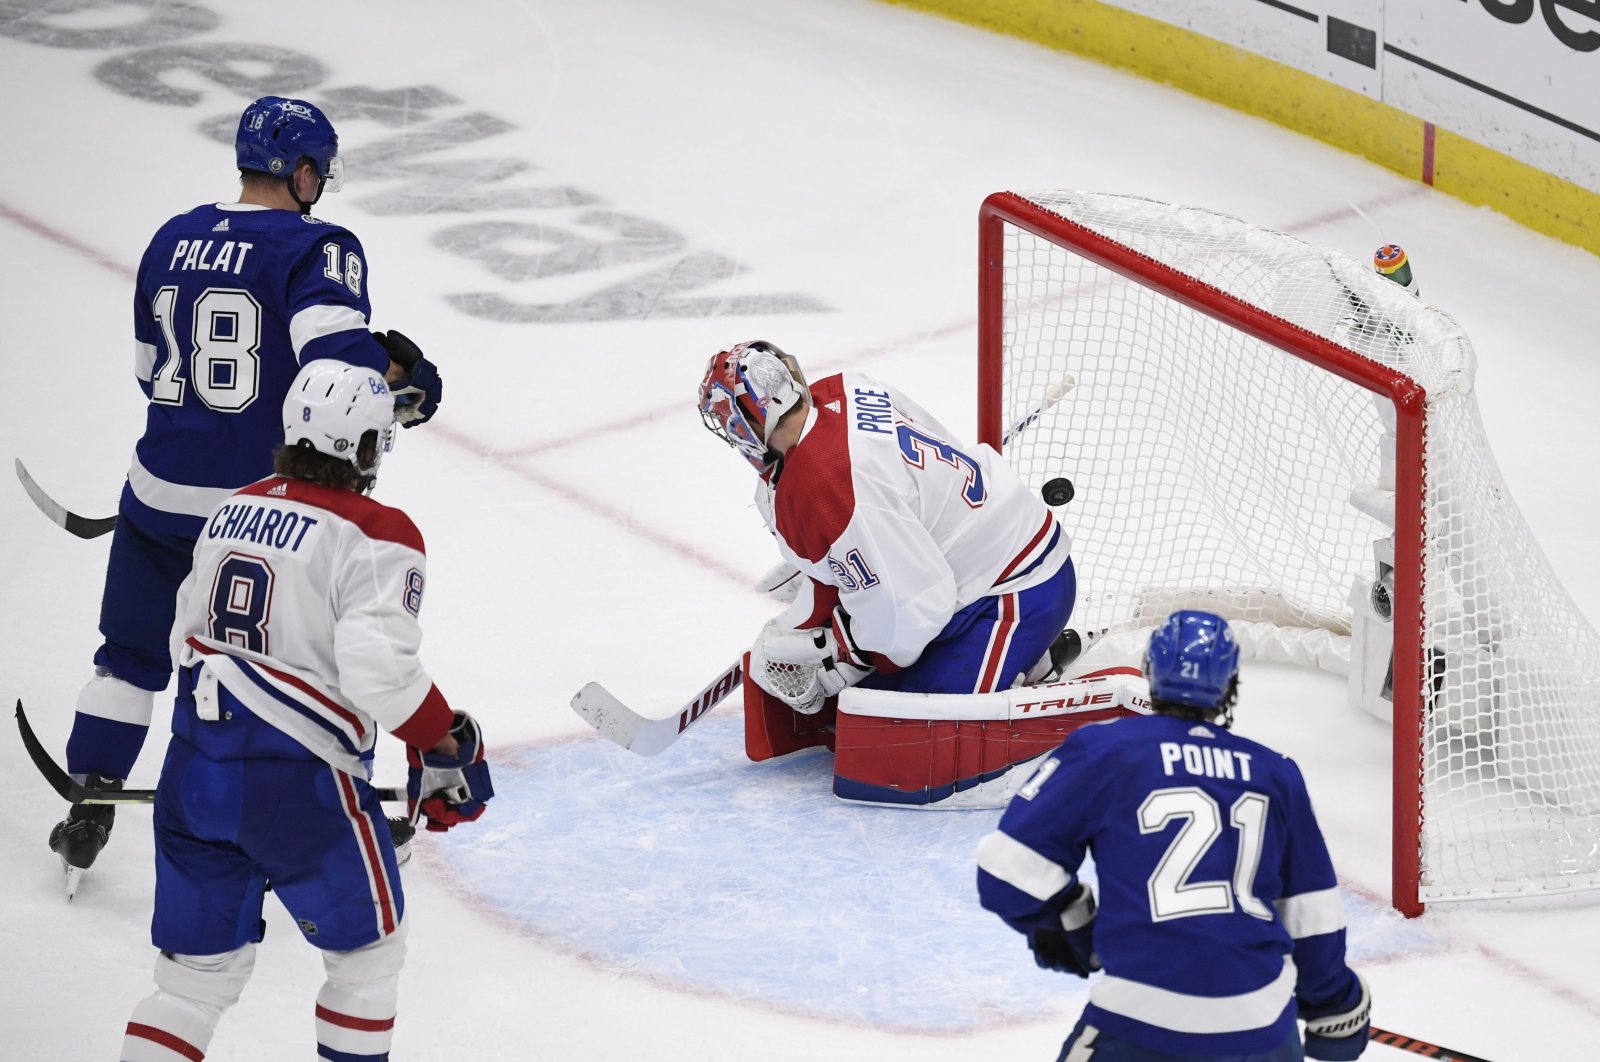 Montreal Canadiens goaltender Carey Price gives up a goal in the third period of Game 1 of the 2021 Stanley Cup Final at Amalie Arena, Tampa, Florida, U.S., June 28, 2021. (Reuters Photo)